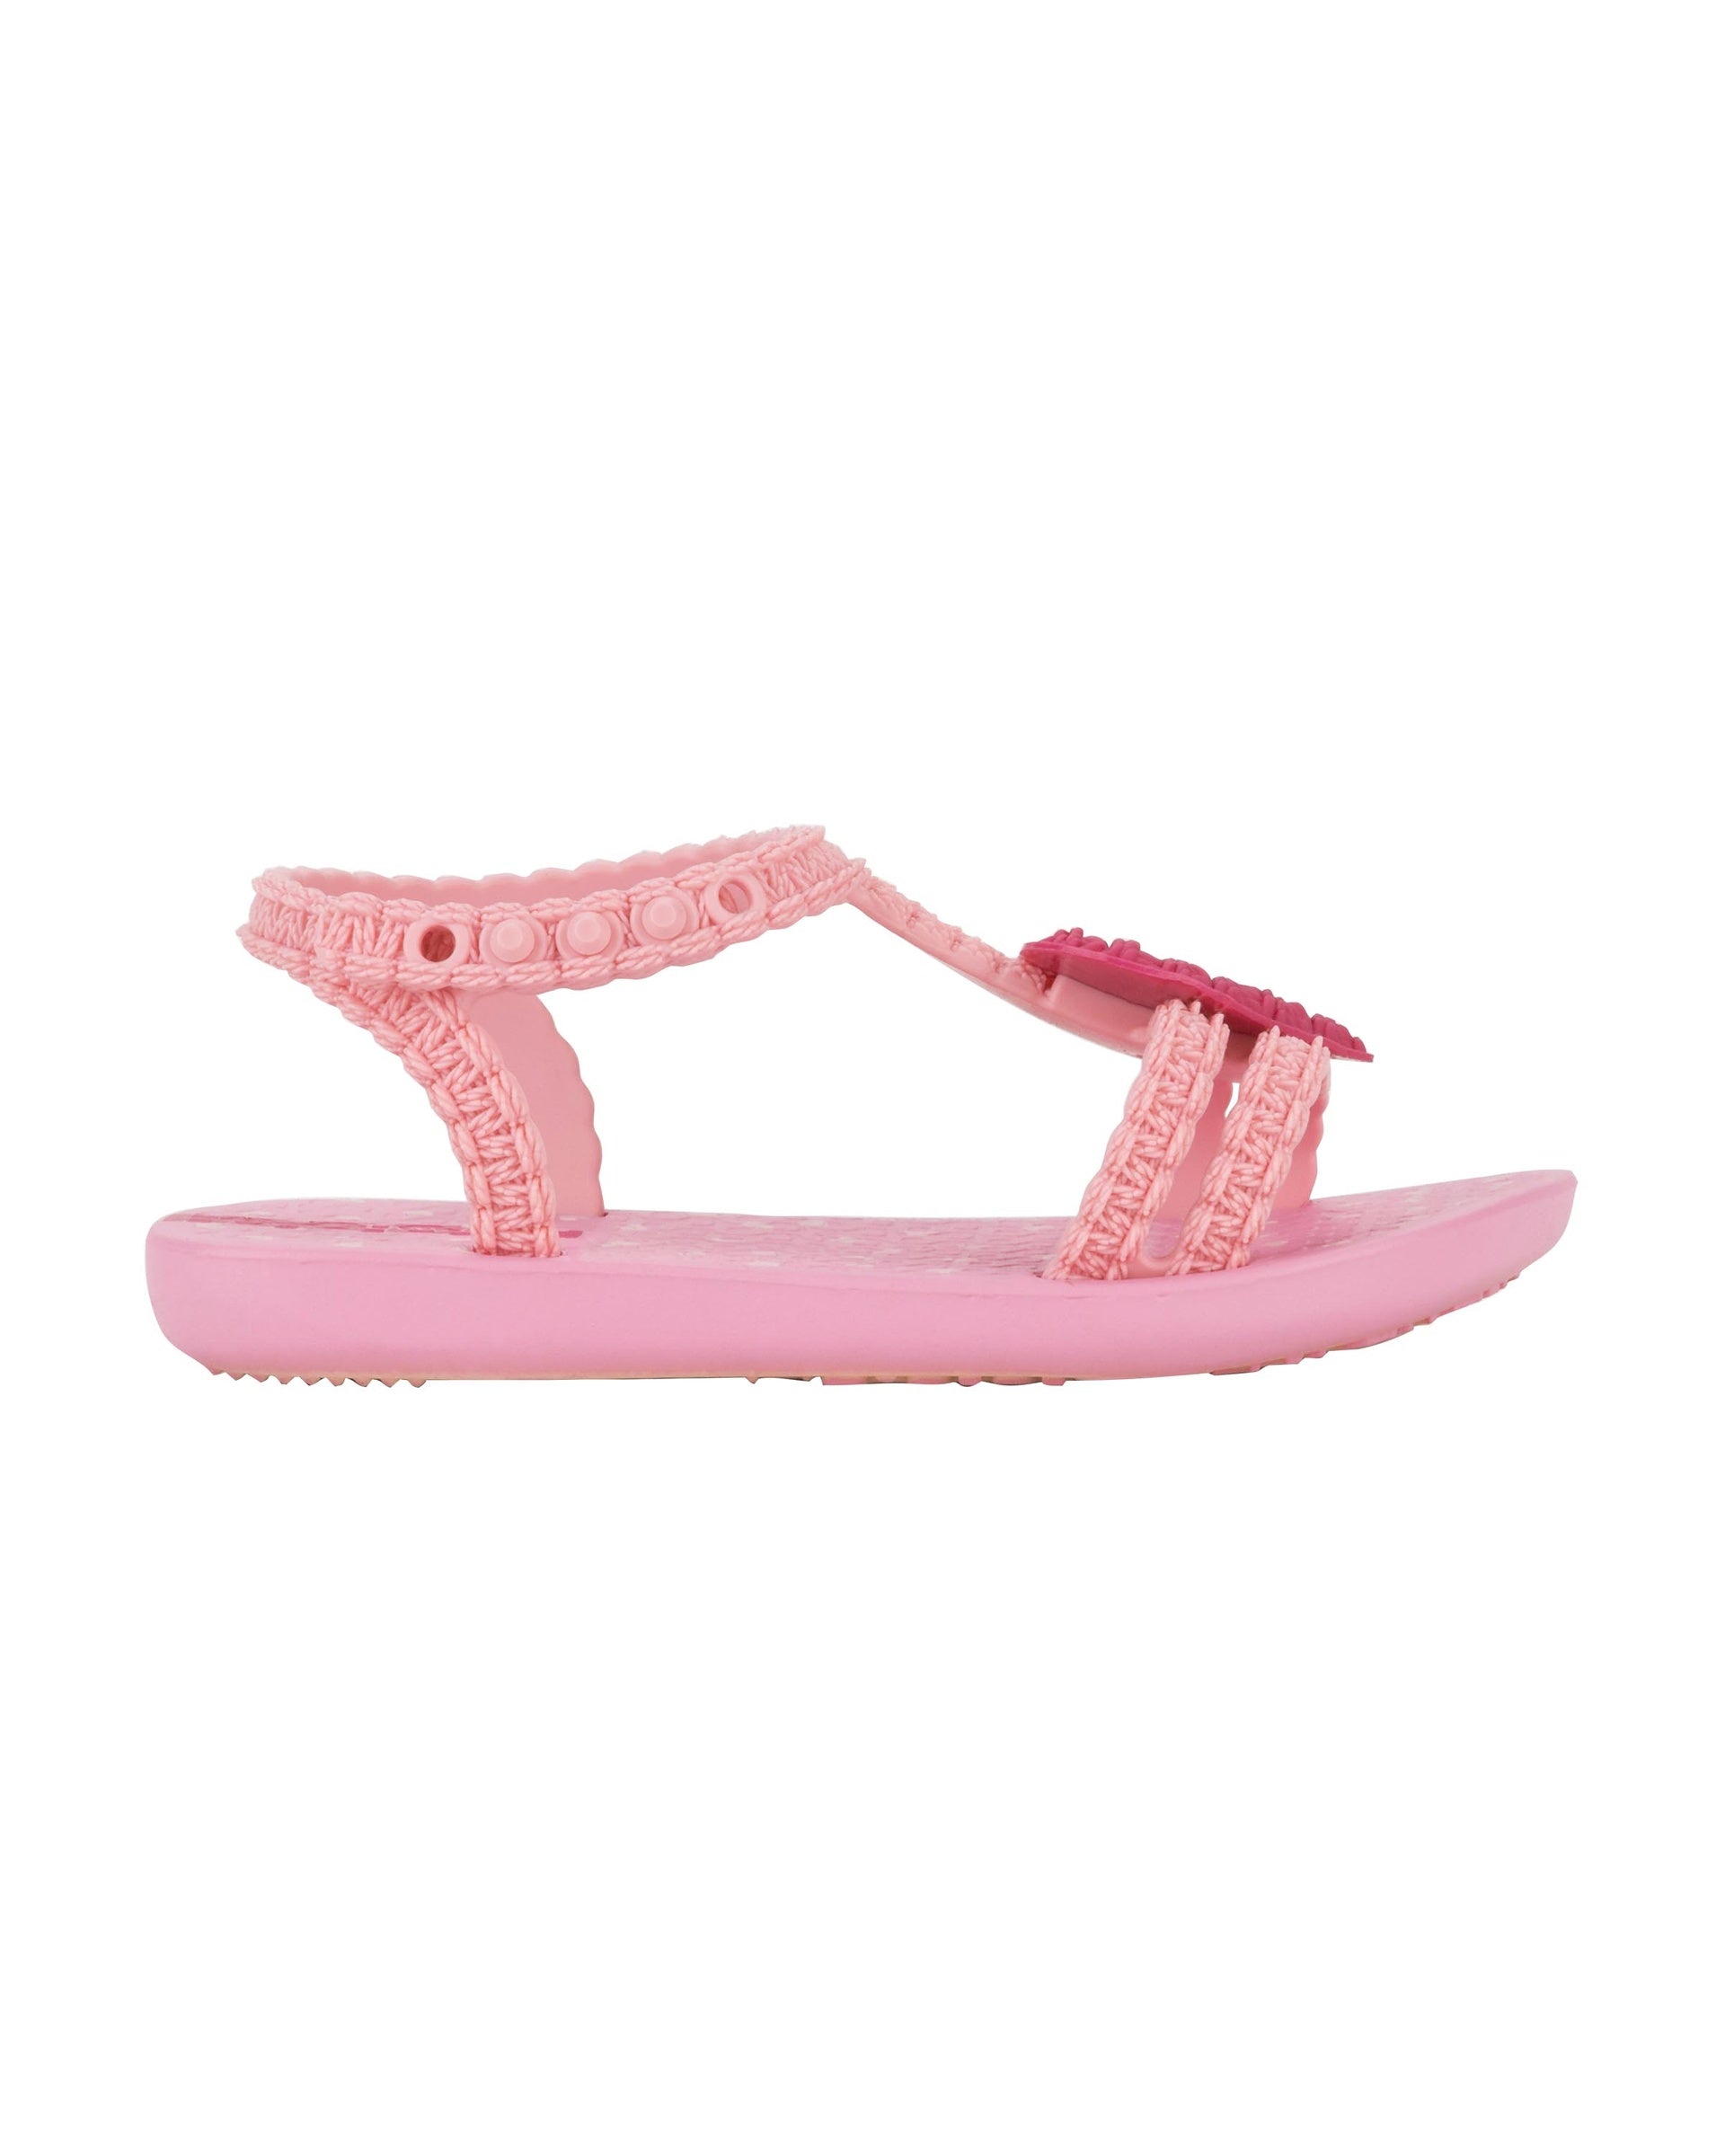 Outer side view of a pink Ipanema My First Ipanema baby sandal with pink heart on top and crochet texture .